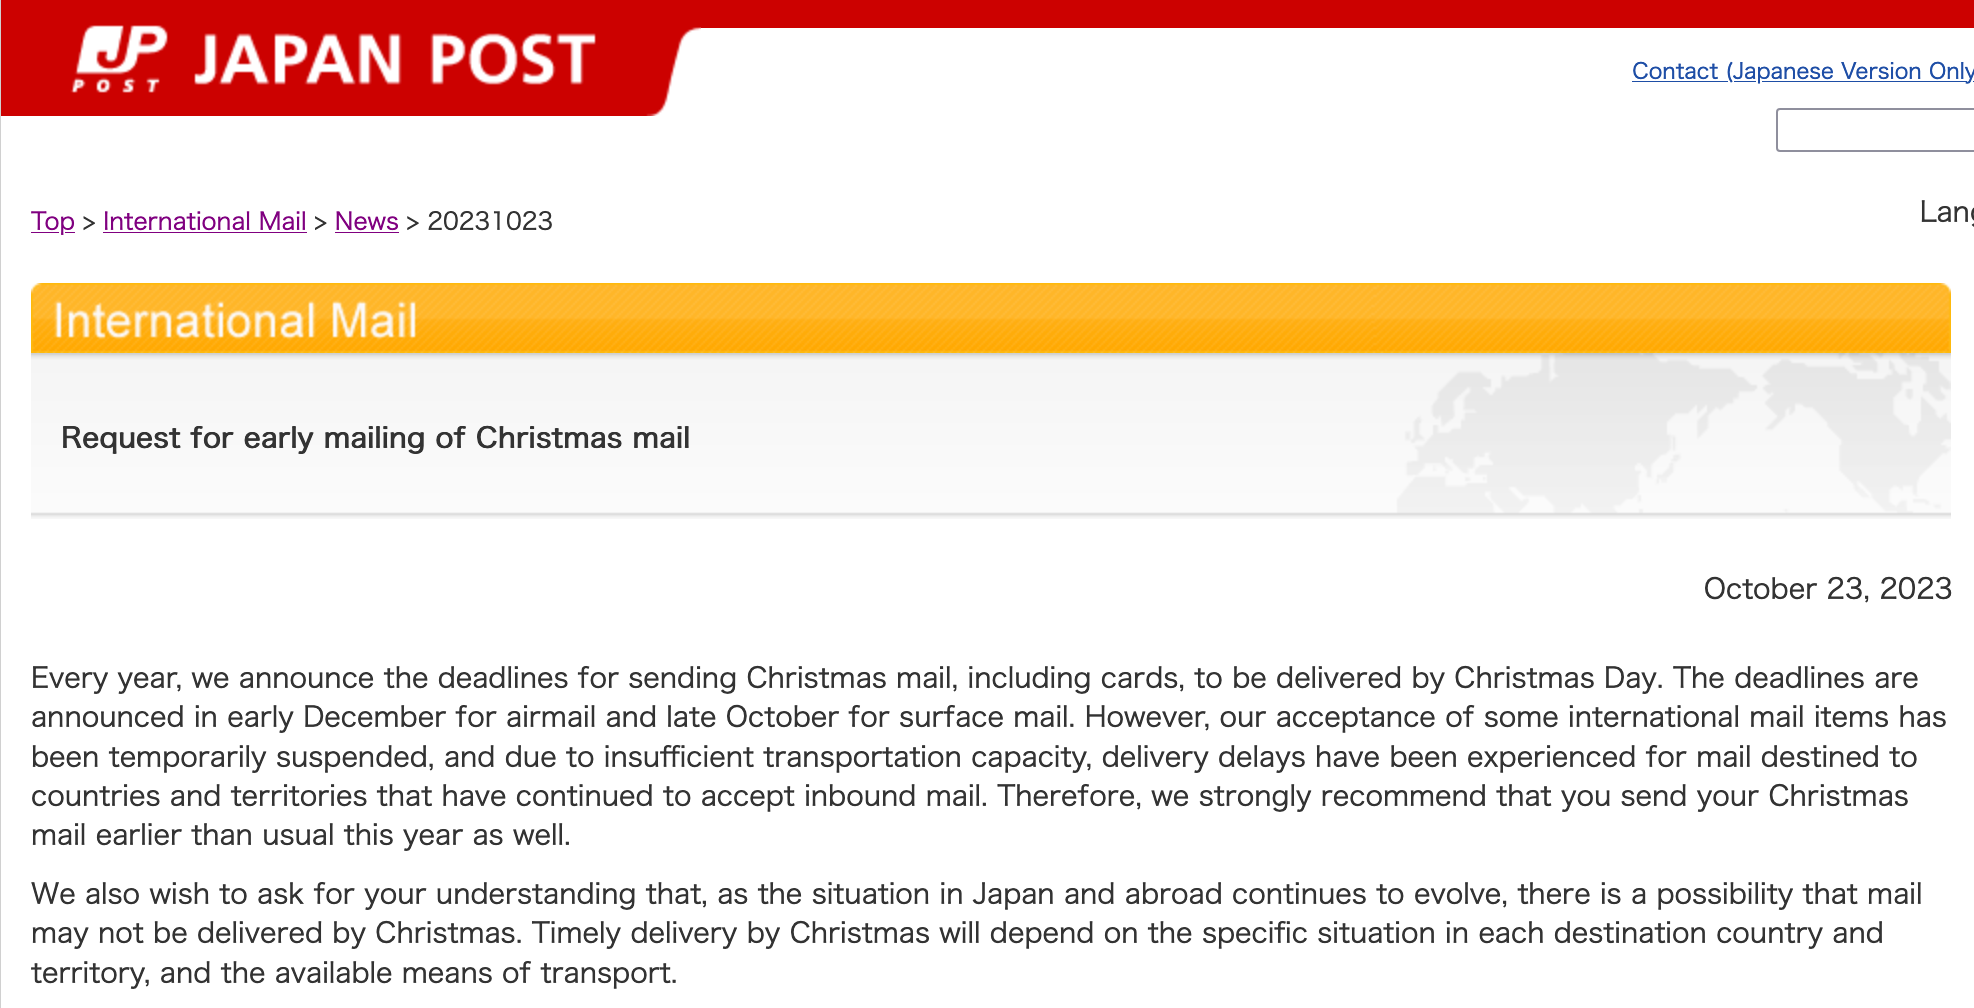 Request for early mailing of Christmas mail